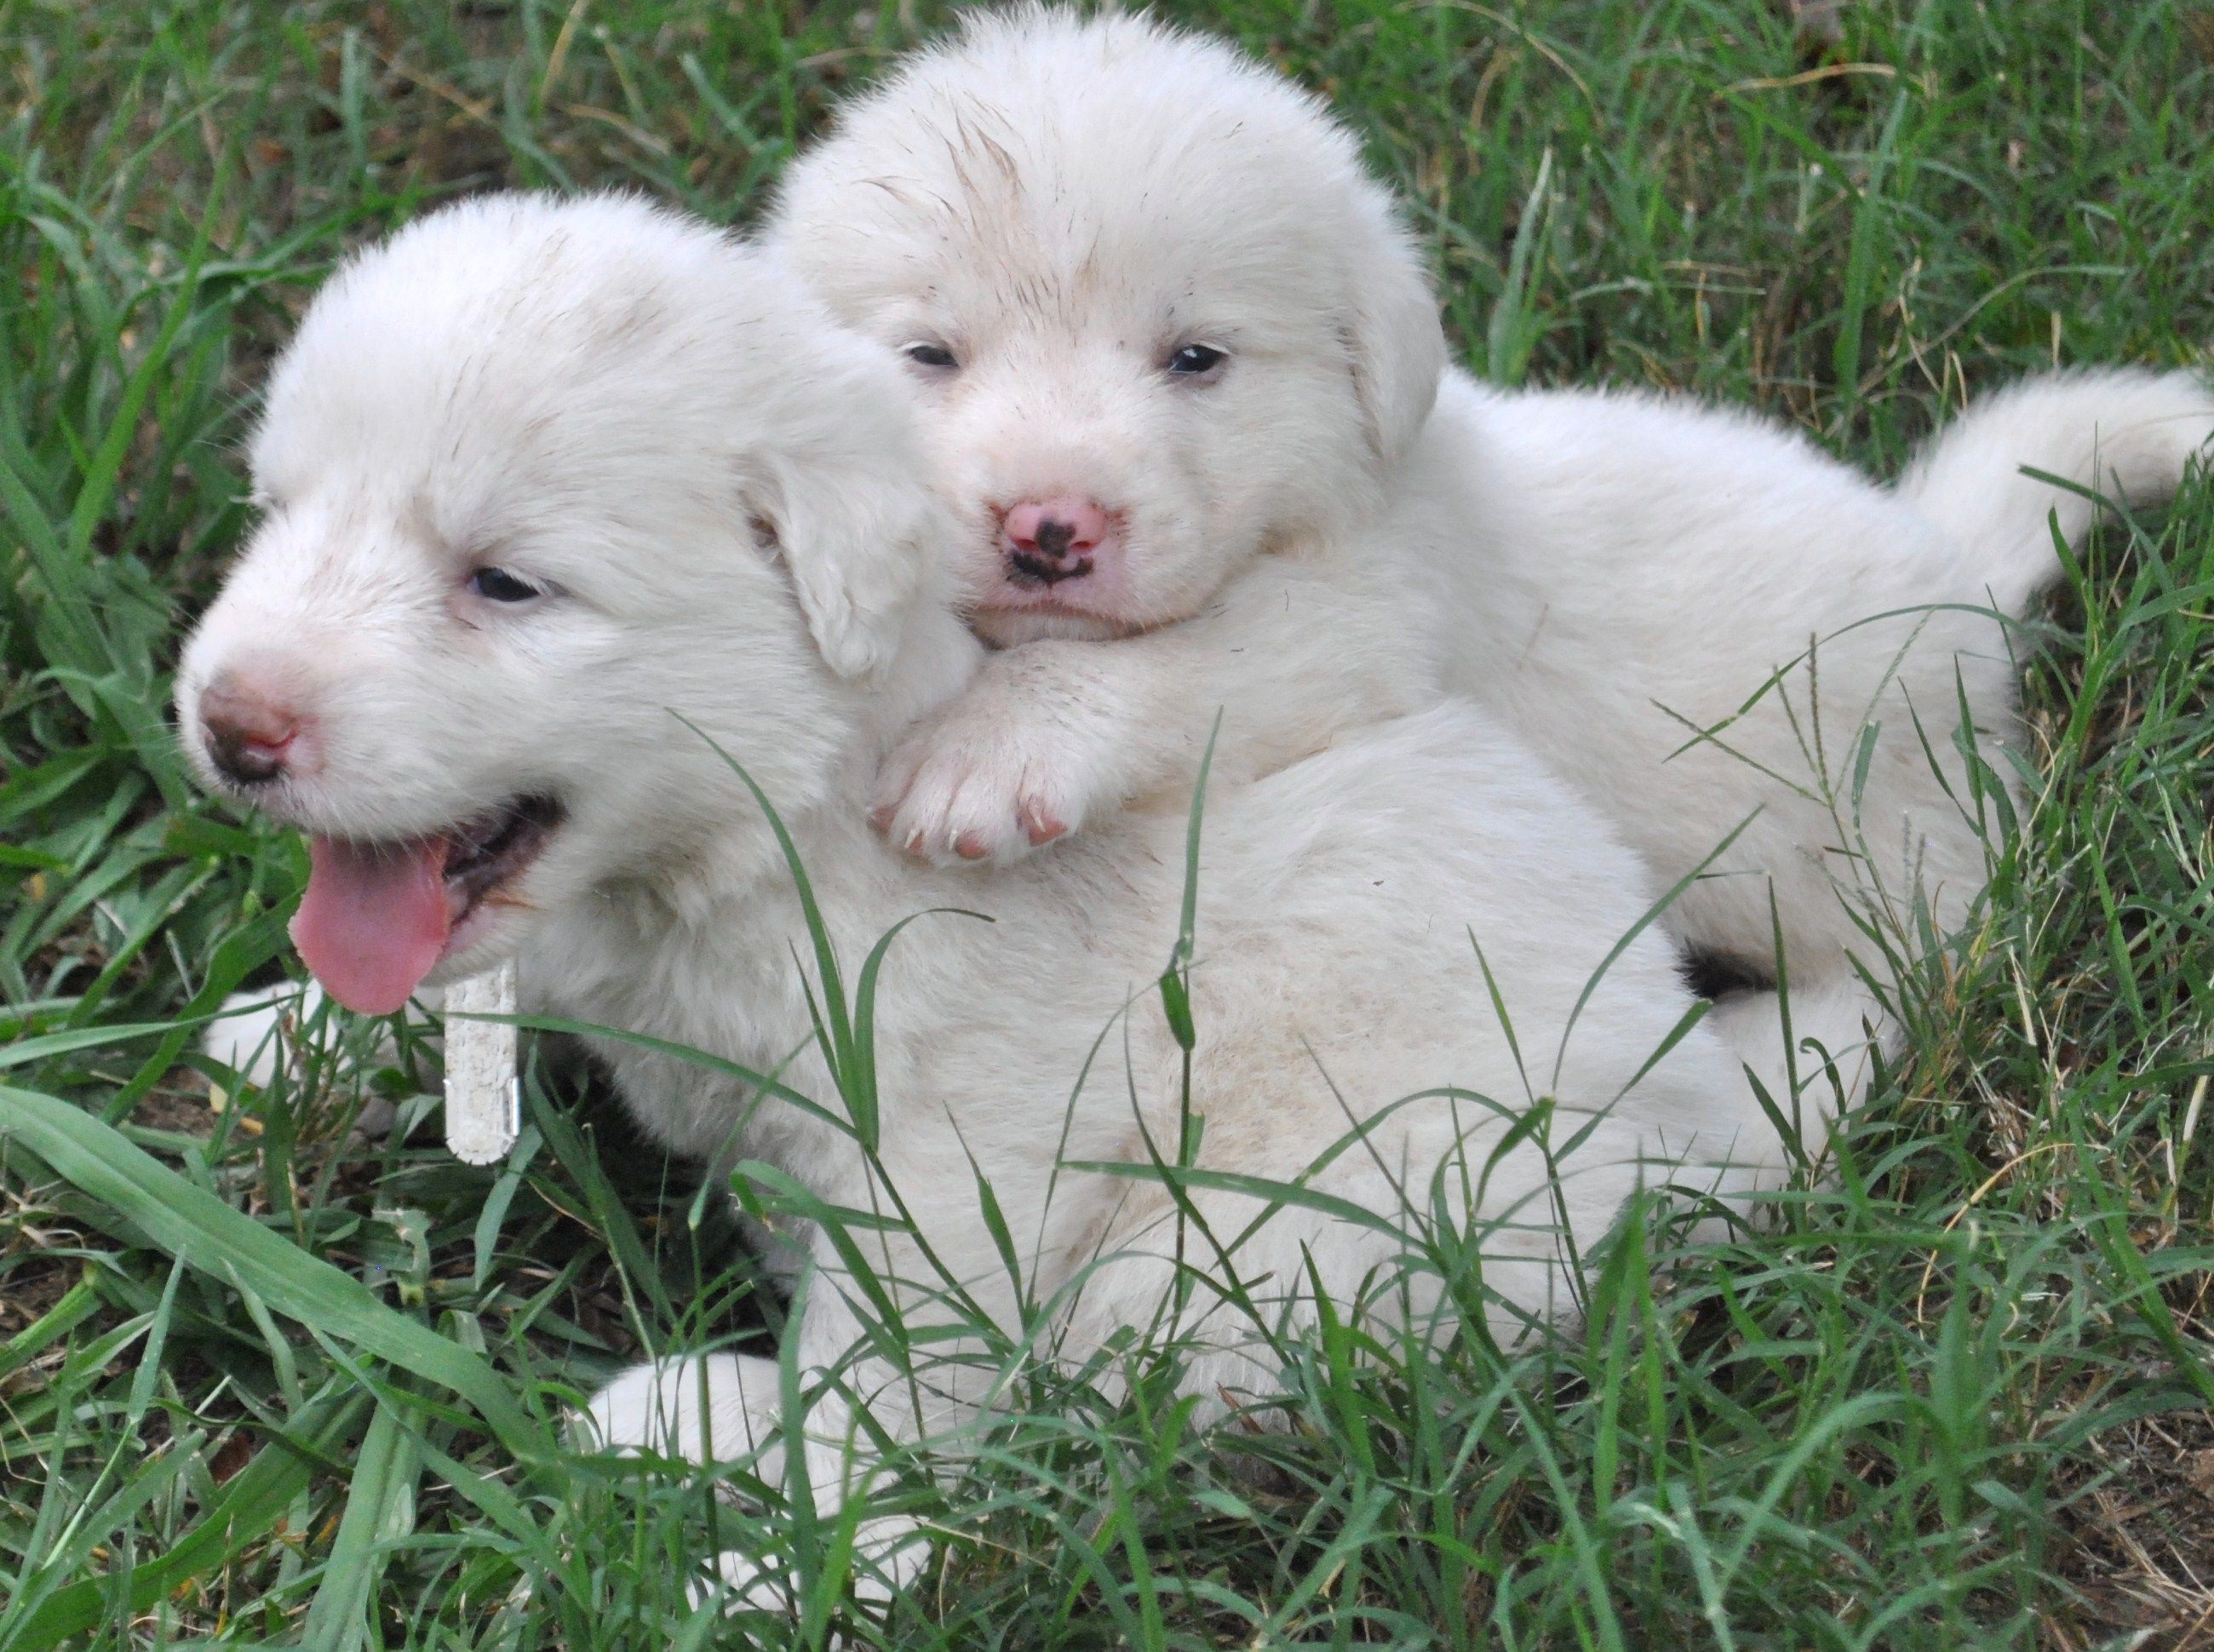 Great Pyrenees puppies photo. Great pyrenees puppy, Pyrenees puppies, Great pyrenees dog